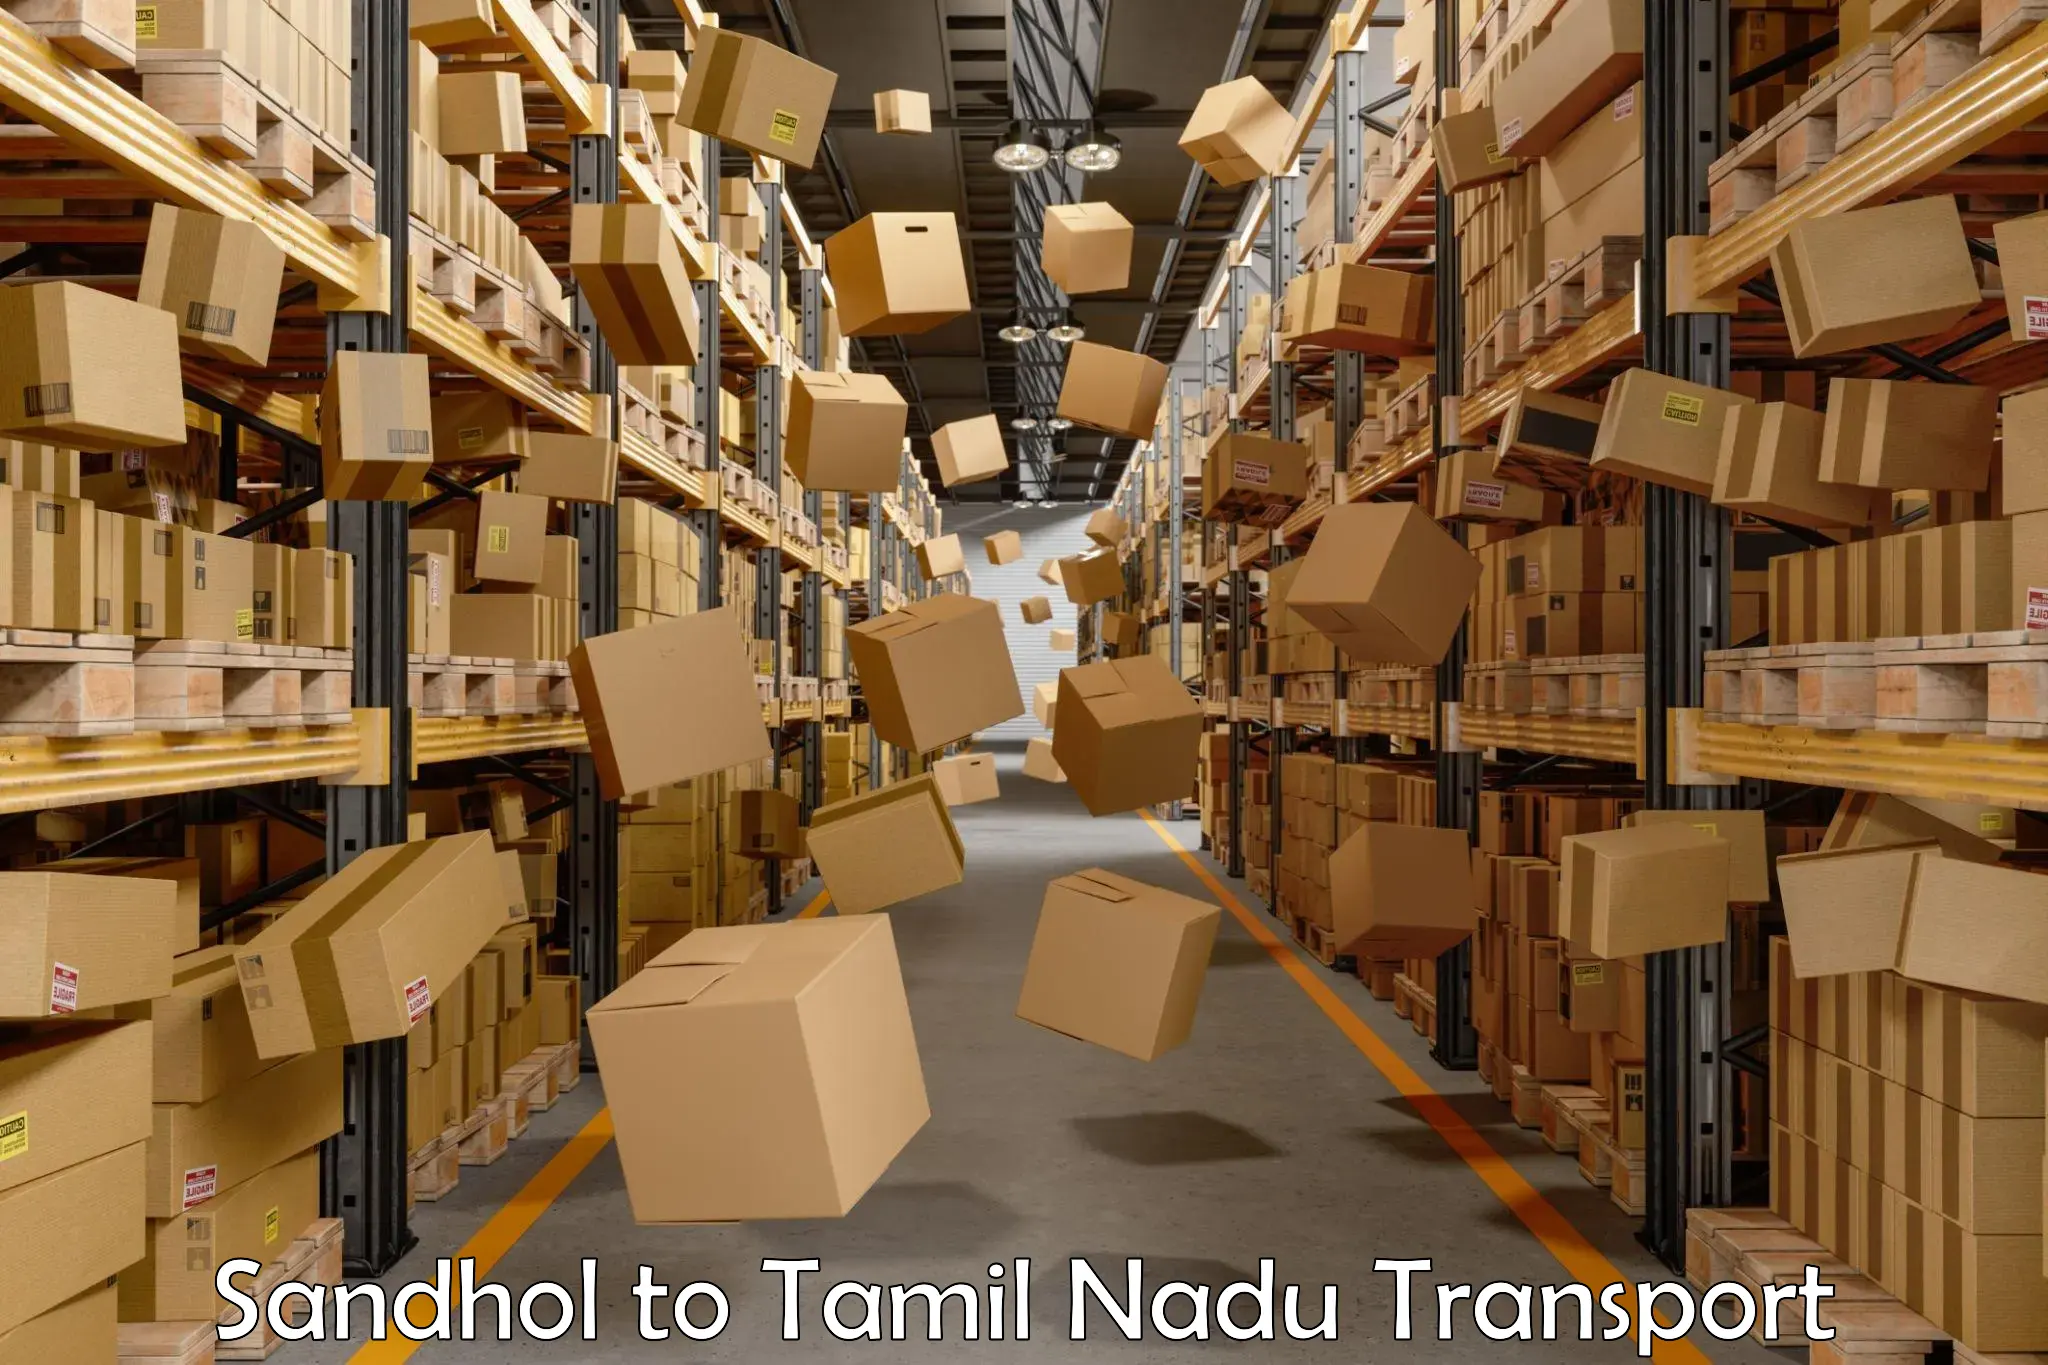 Truck transport companies in India Sandhol to Hosur